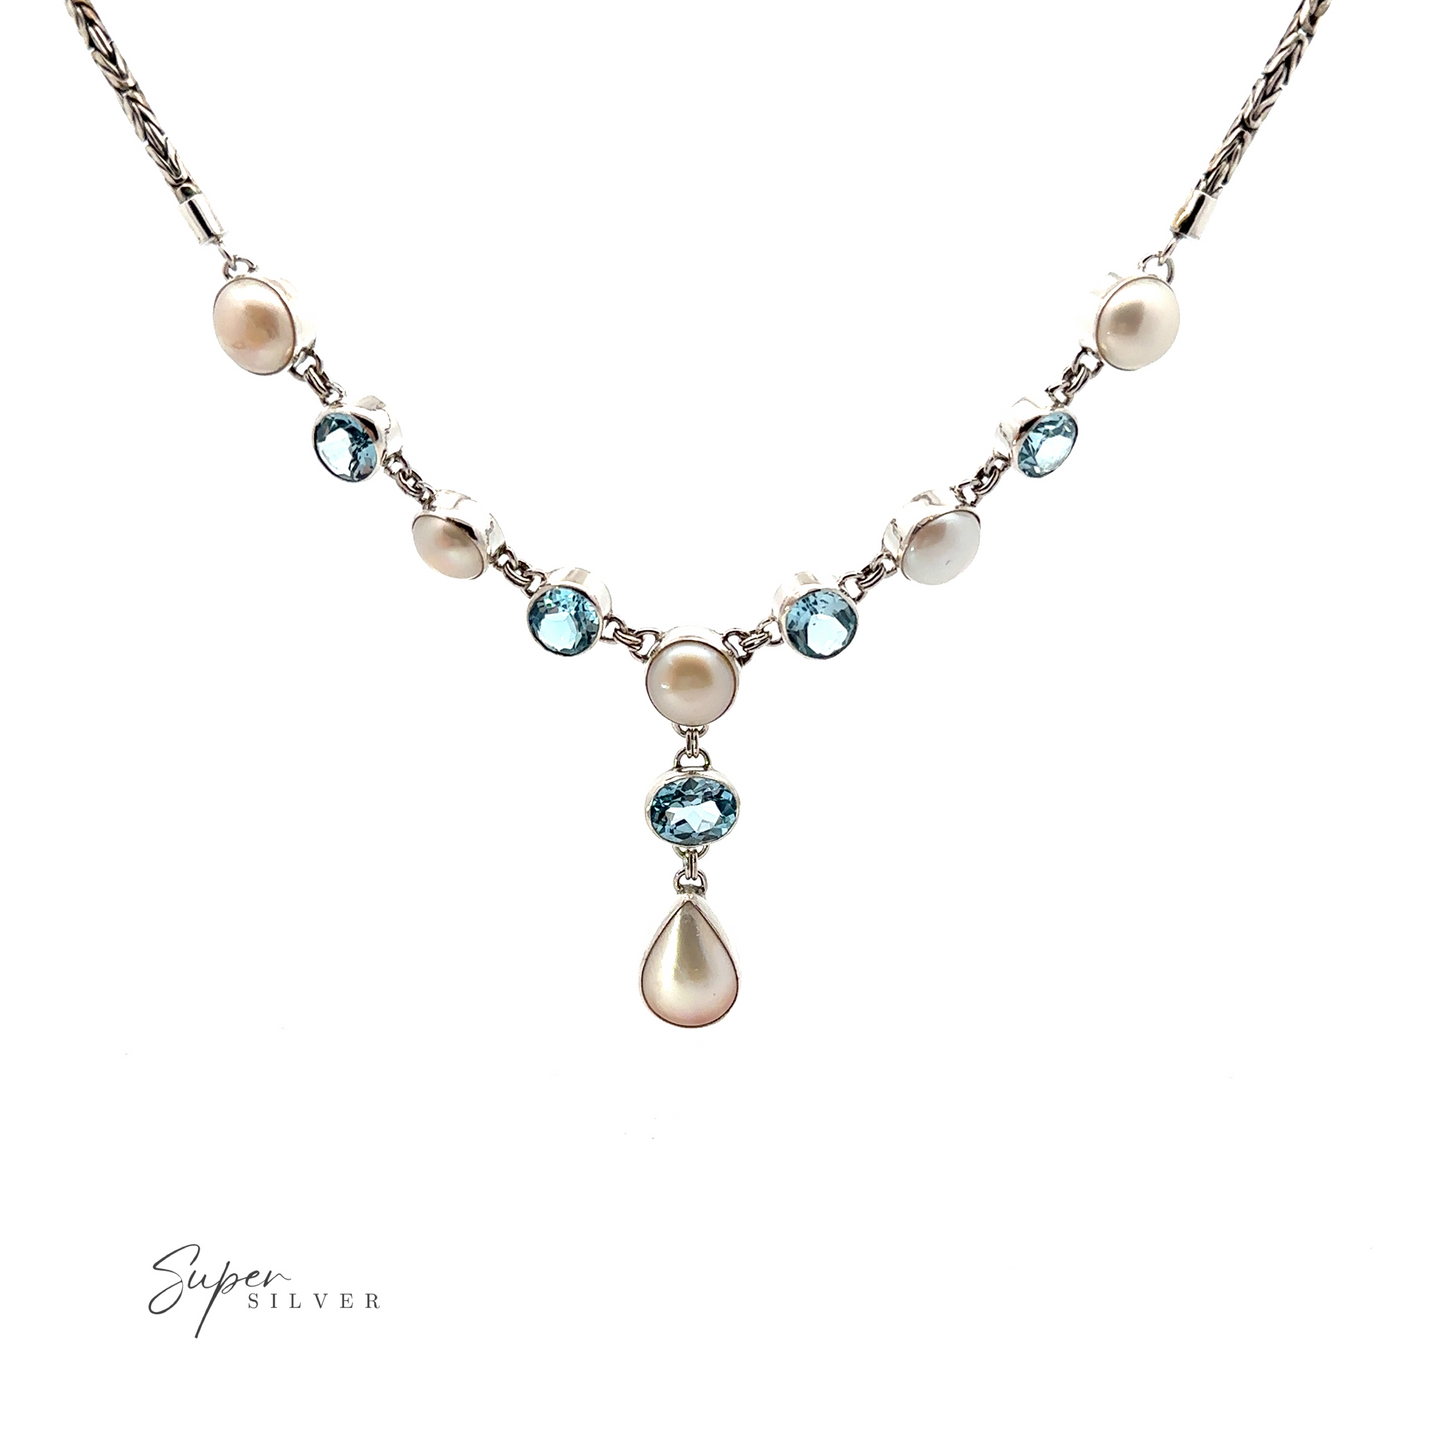 
                  
                    A Stunning Pearl and Gemstone Statement Necklace featuring a combination of pearlescent and blue gemstones, with an elegant teardrop-shaped pearl pendant at the center. Crafted from Sterling Silver, the brand "Super Silver" is displayed in the lower left corner.
                  
                